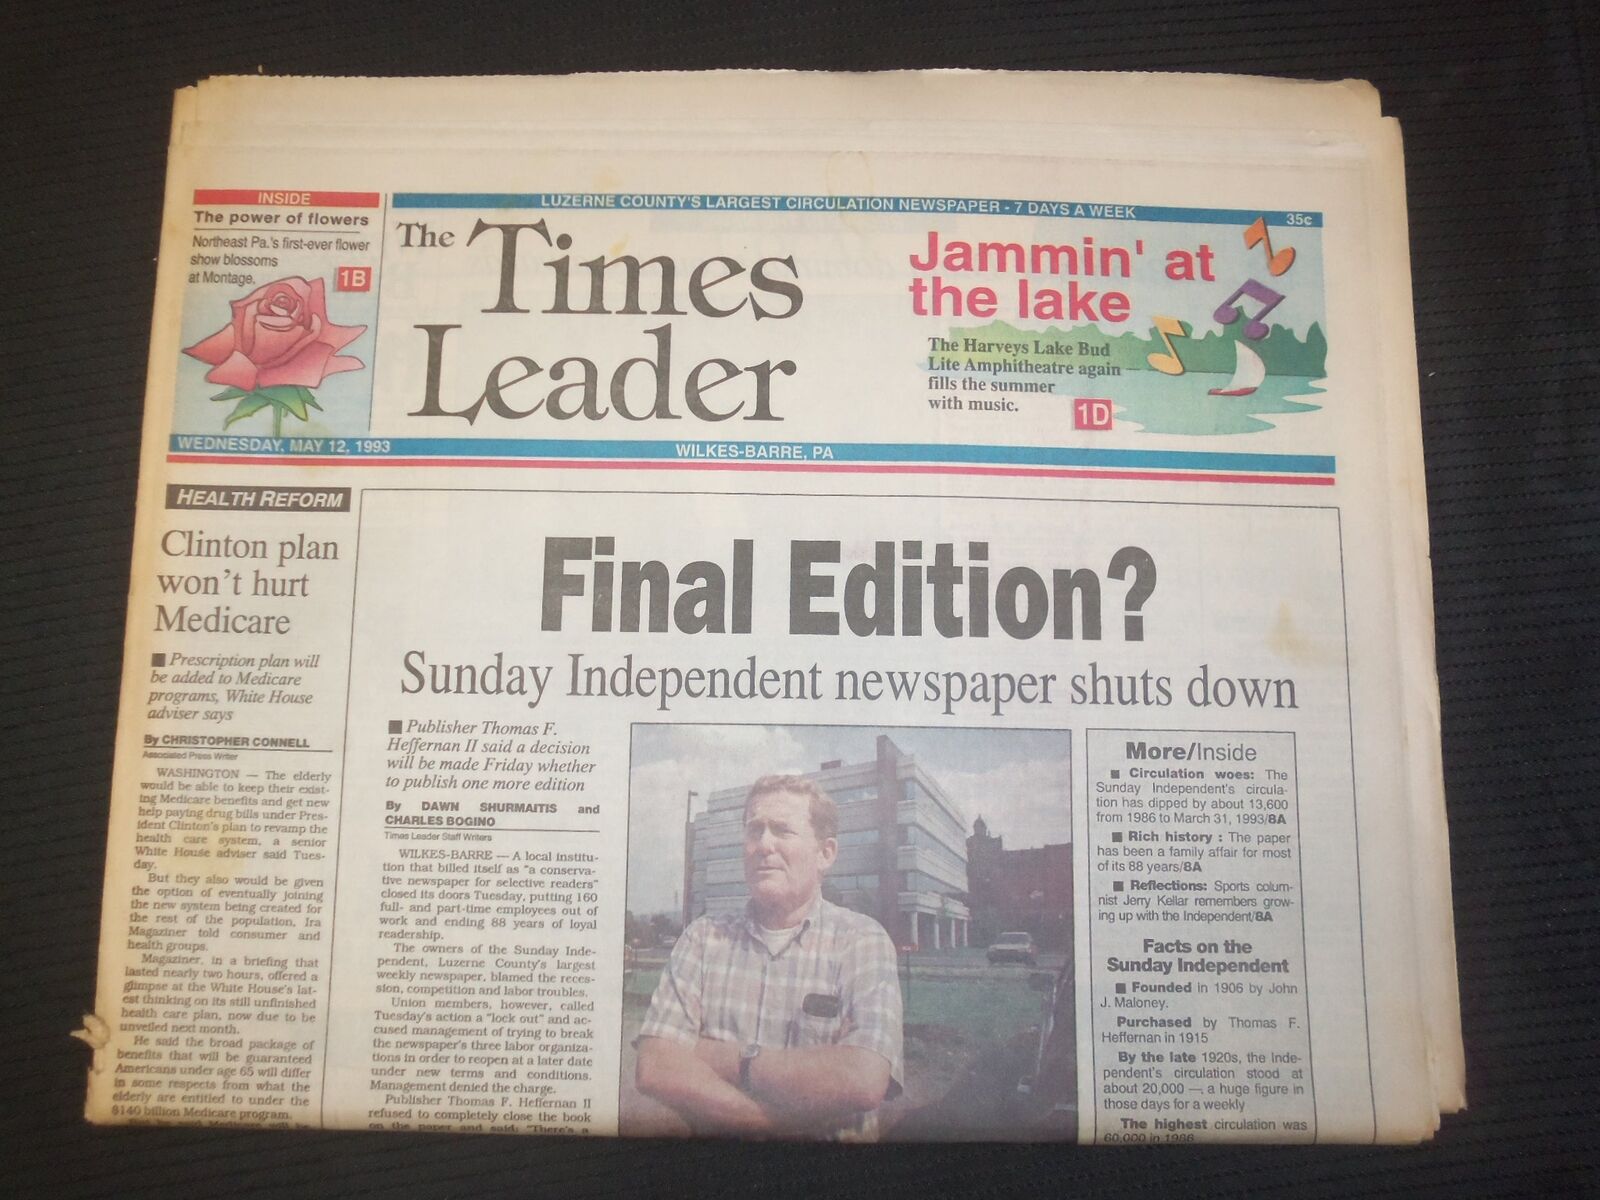 1993 MAY 12 WILKES-BARRE TIMES LEADER -CLINTON PLAN WON'T HURT MEDICARE- NP 7546